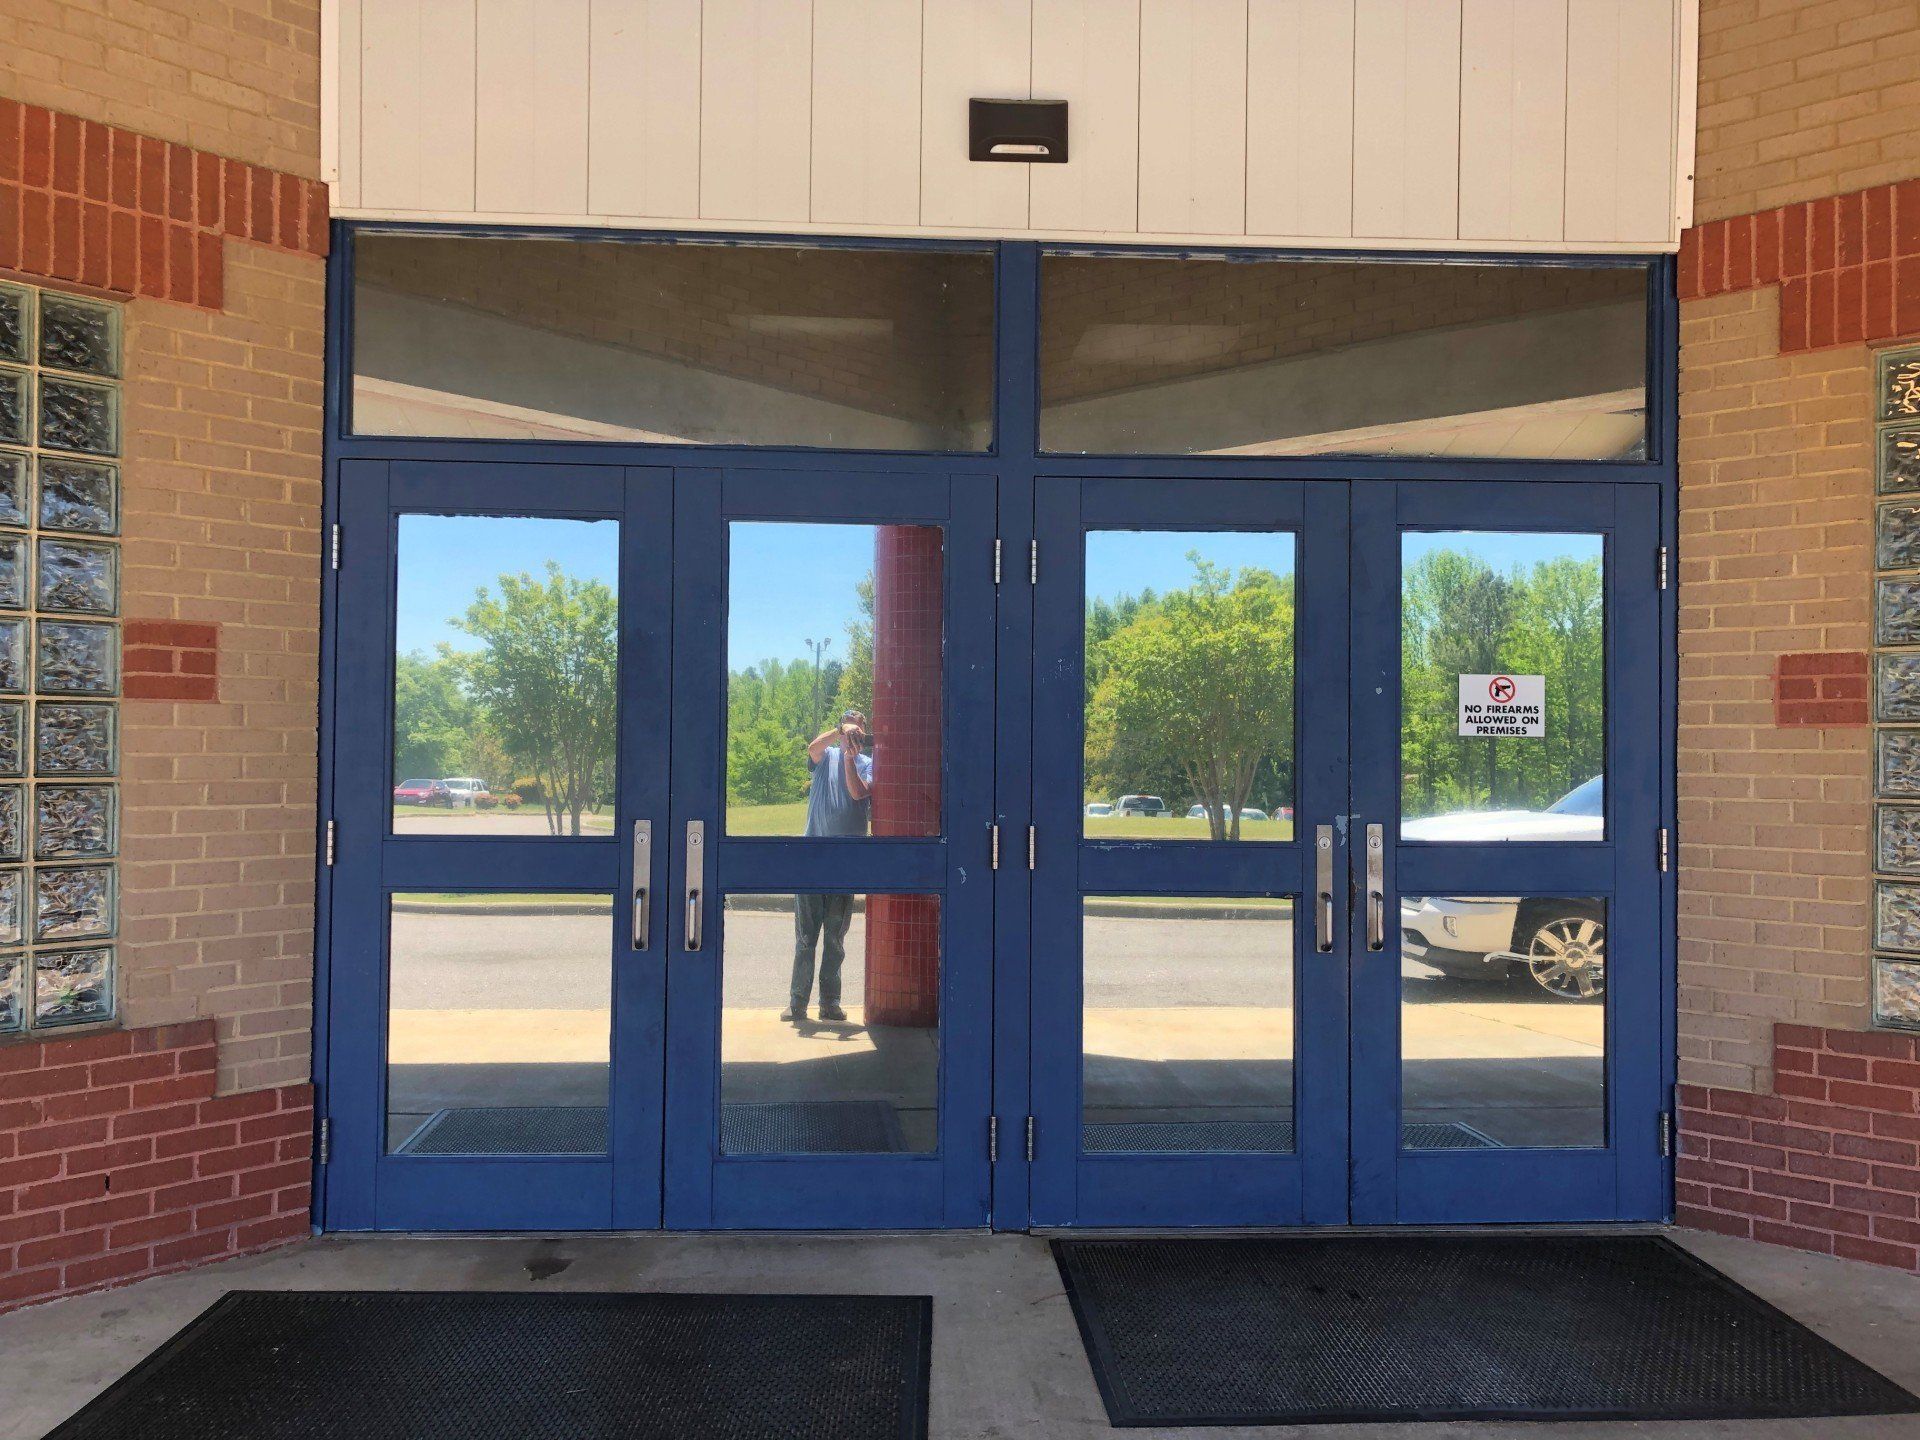 After Glass doors were SPF Tinted - Heat & Glare was removed from the interior of Jemison Elementary School lobby on 4/15/2019.